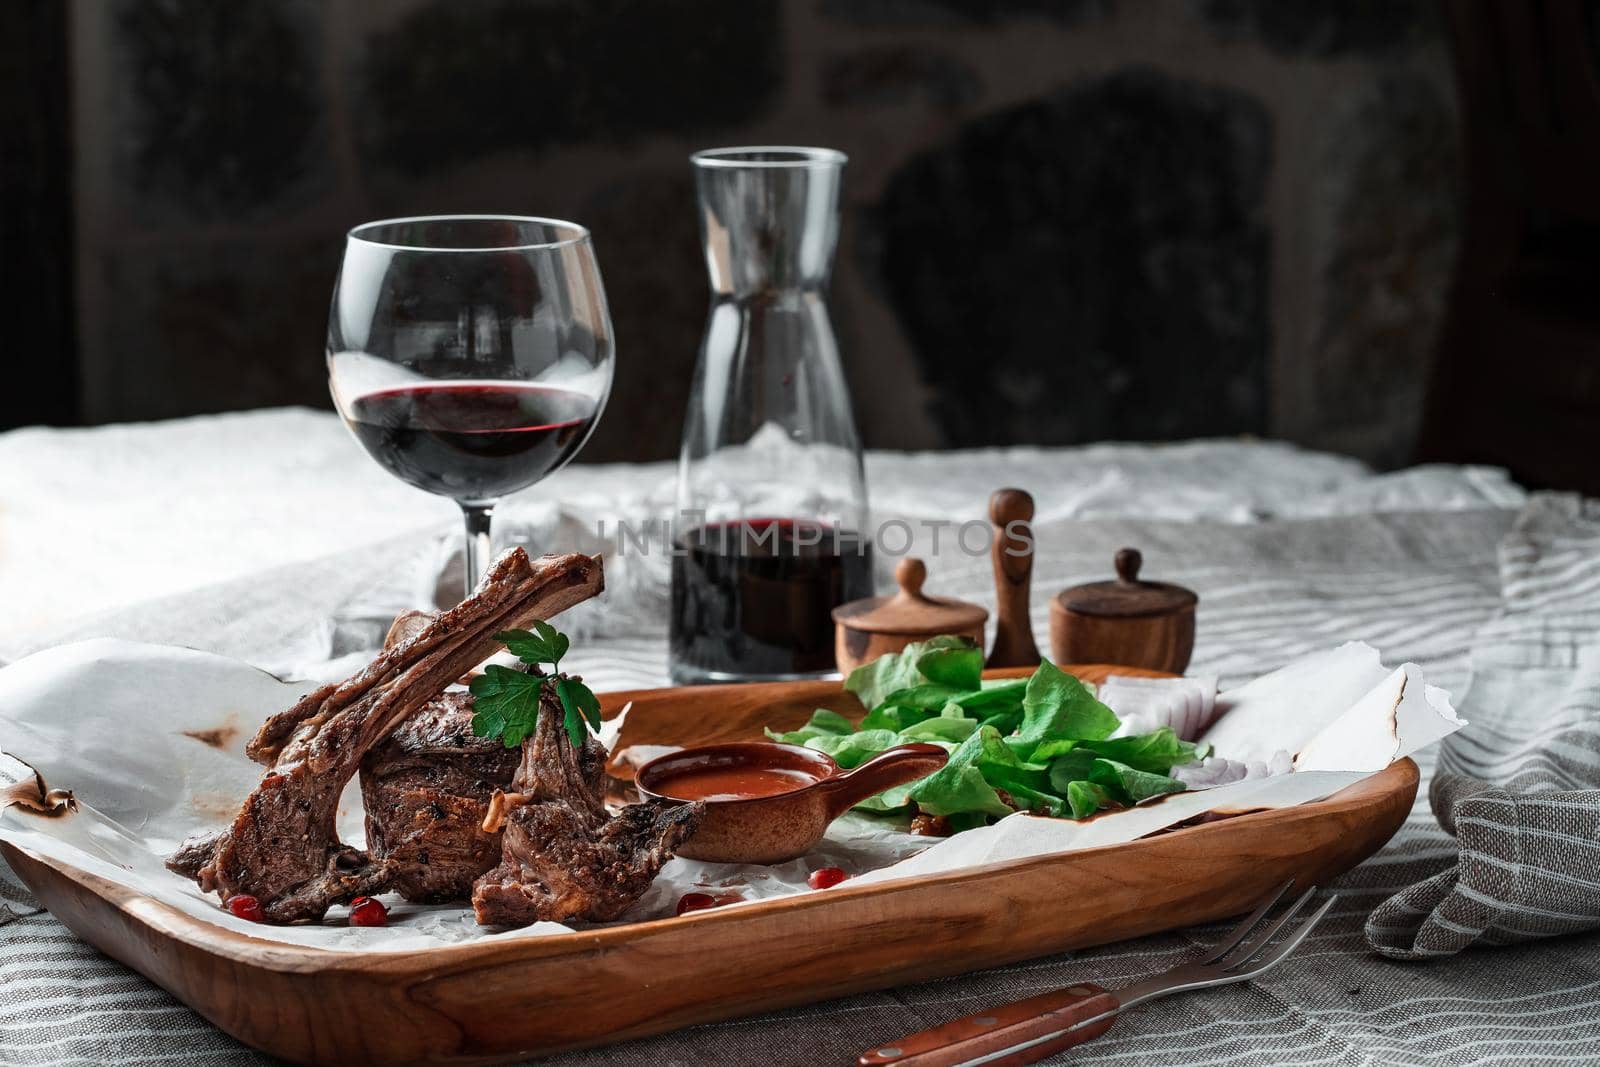 Grilled lamb loin on a wooden plate with lettuce leaves and wine. High quality photo